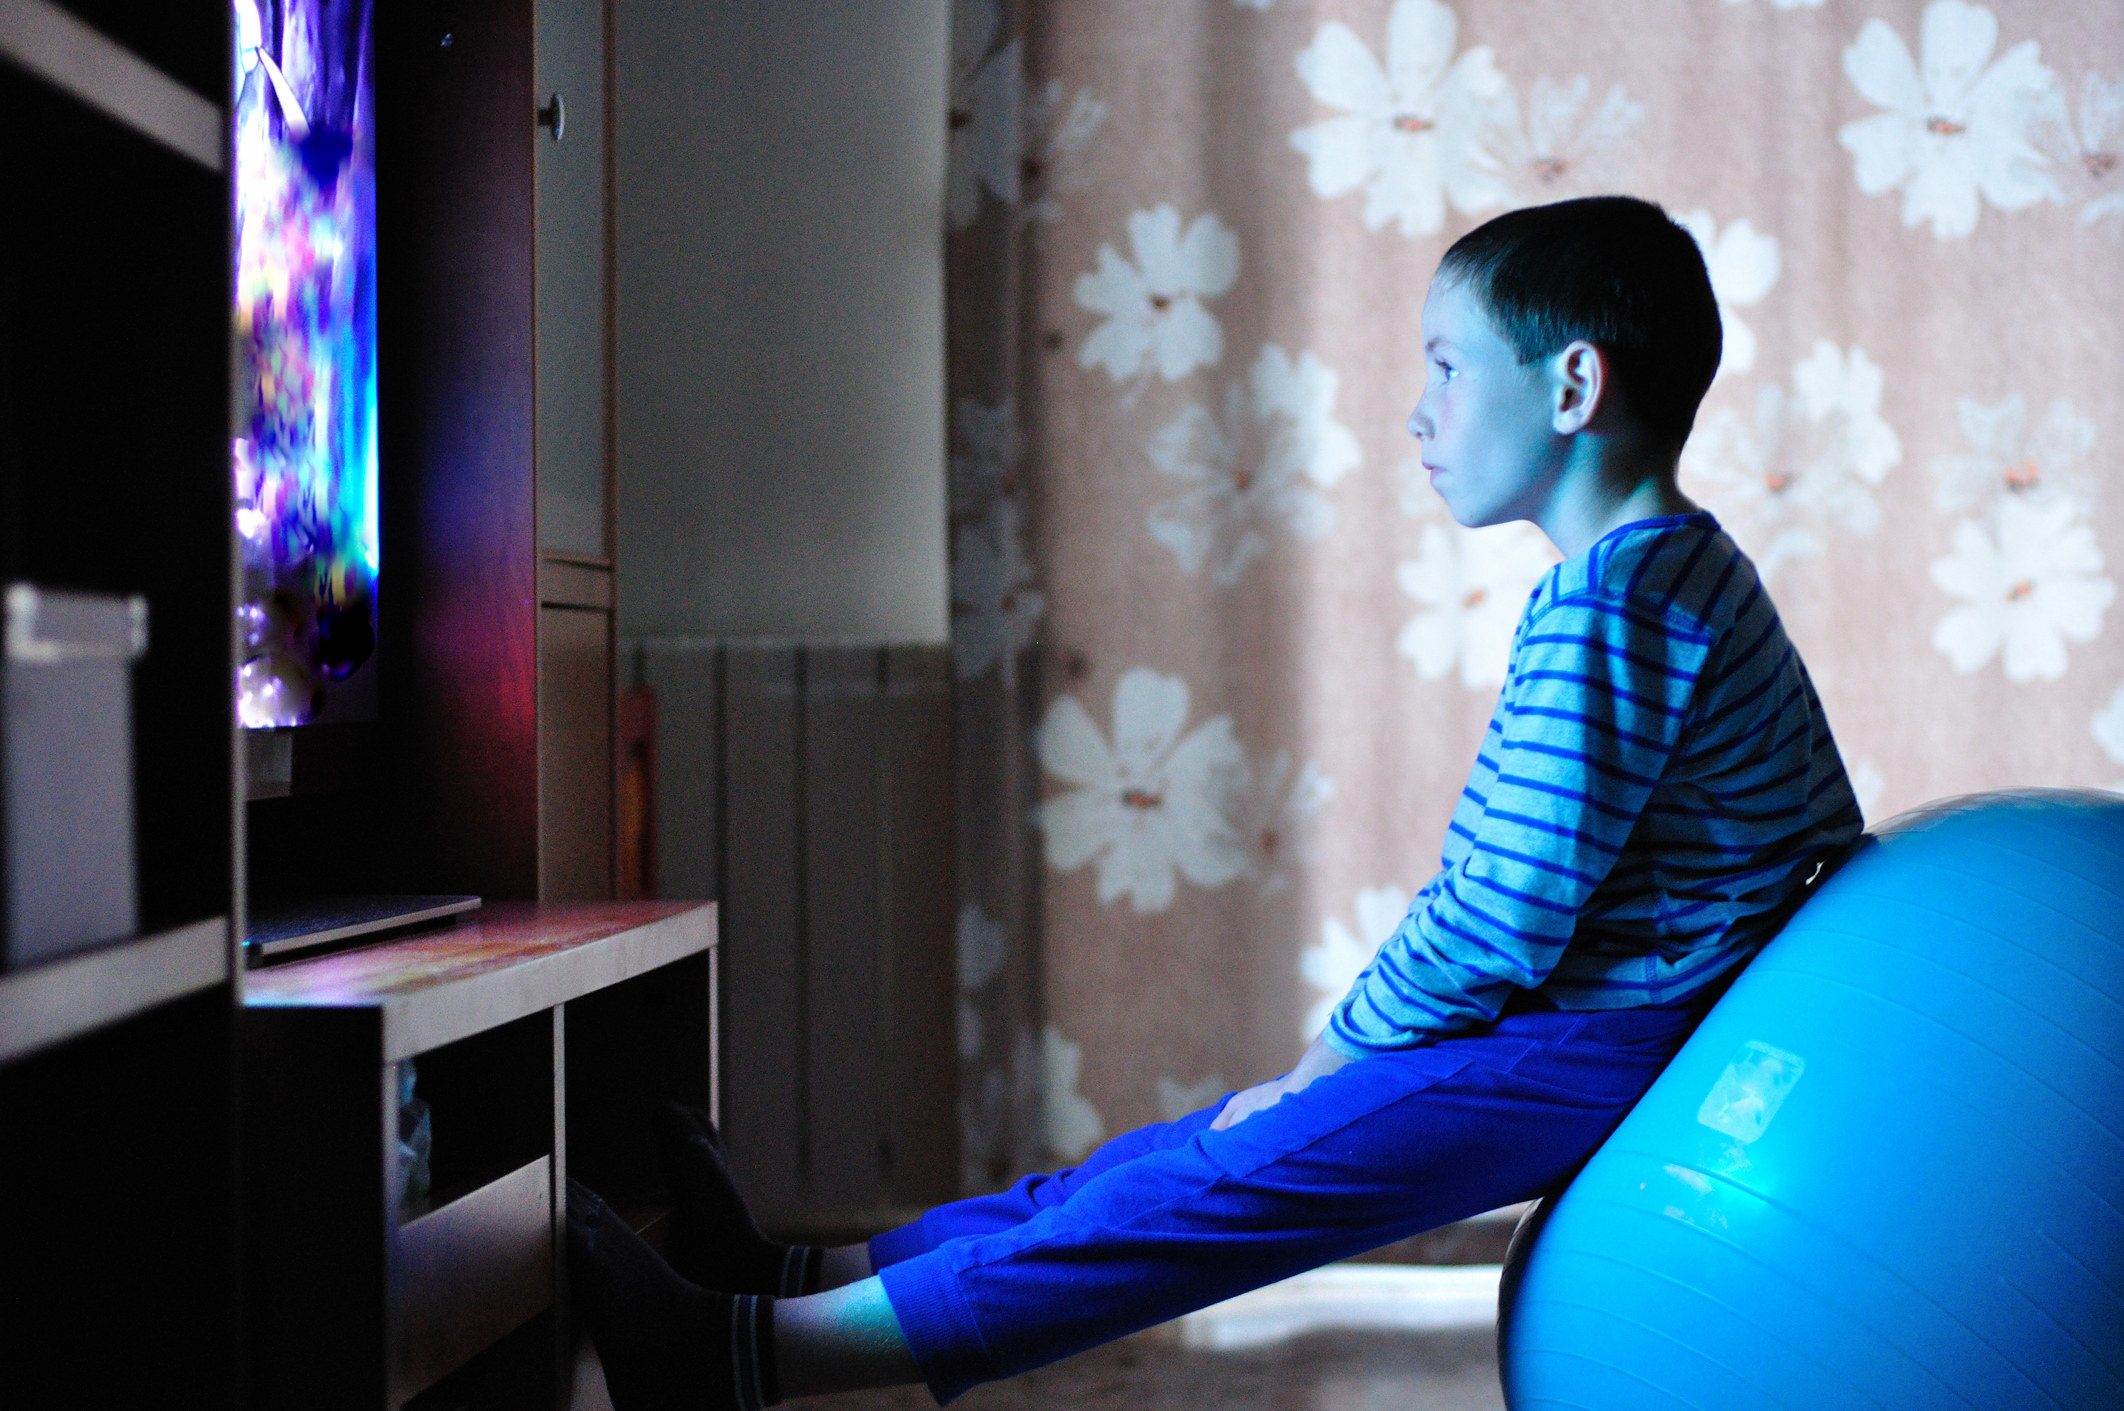 Young child watching television